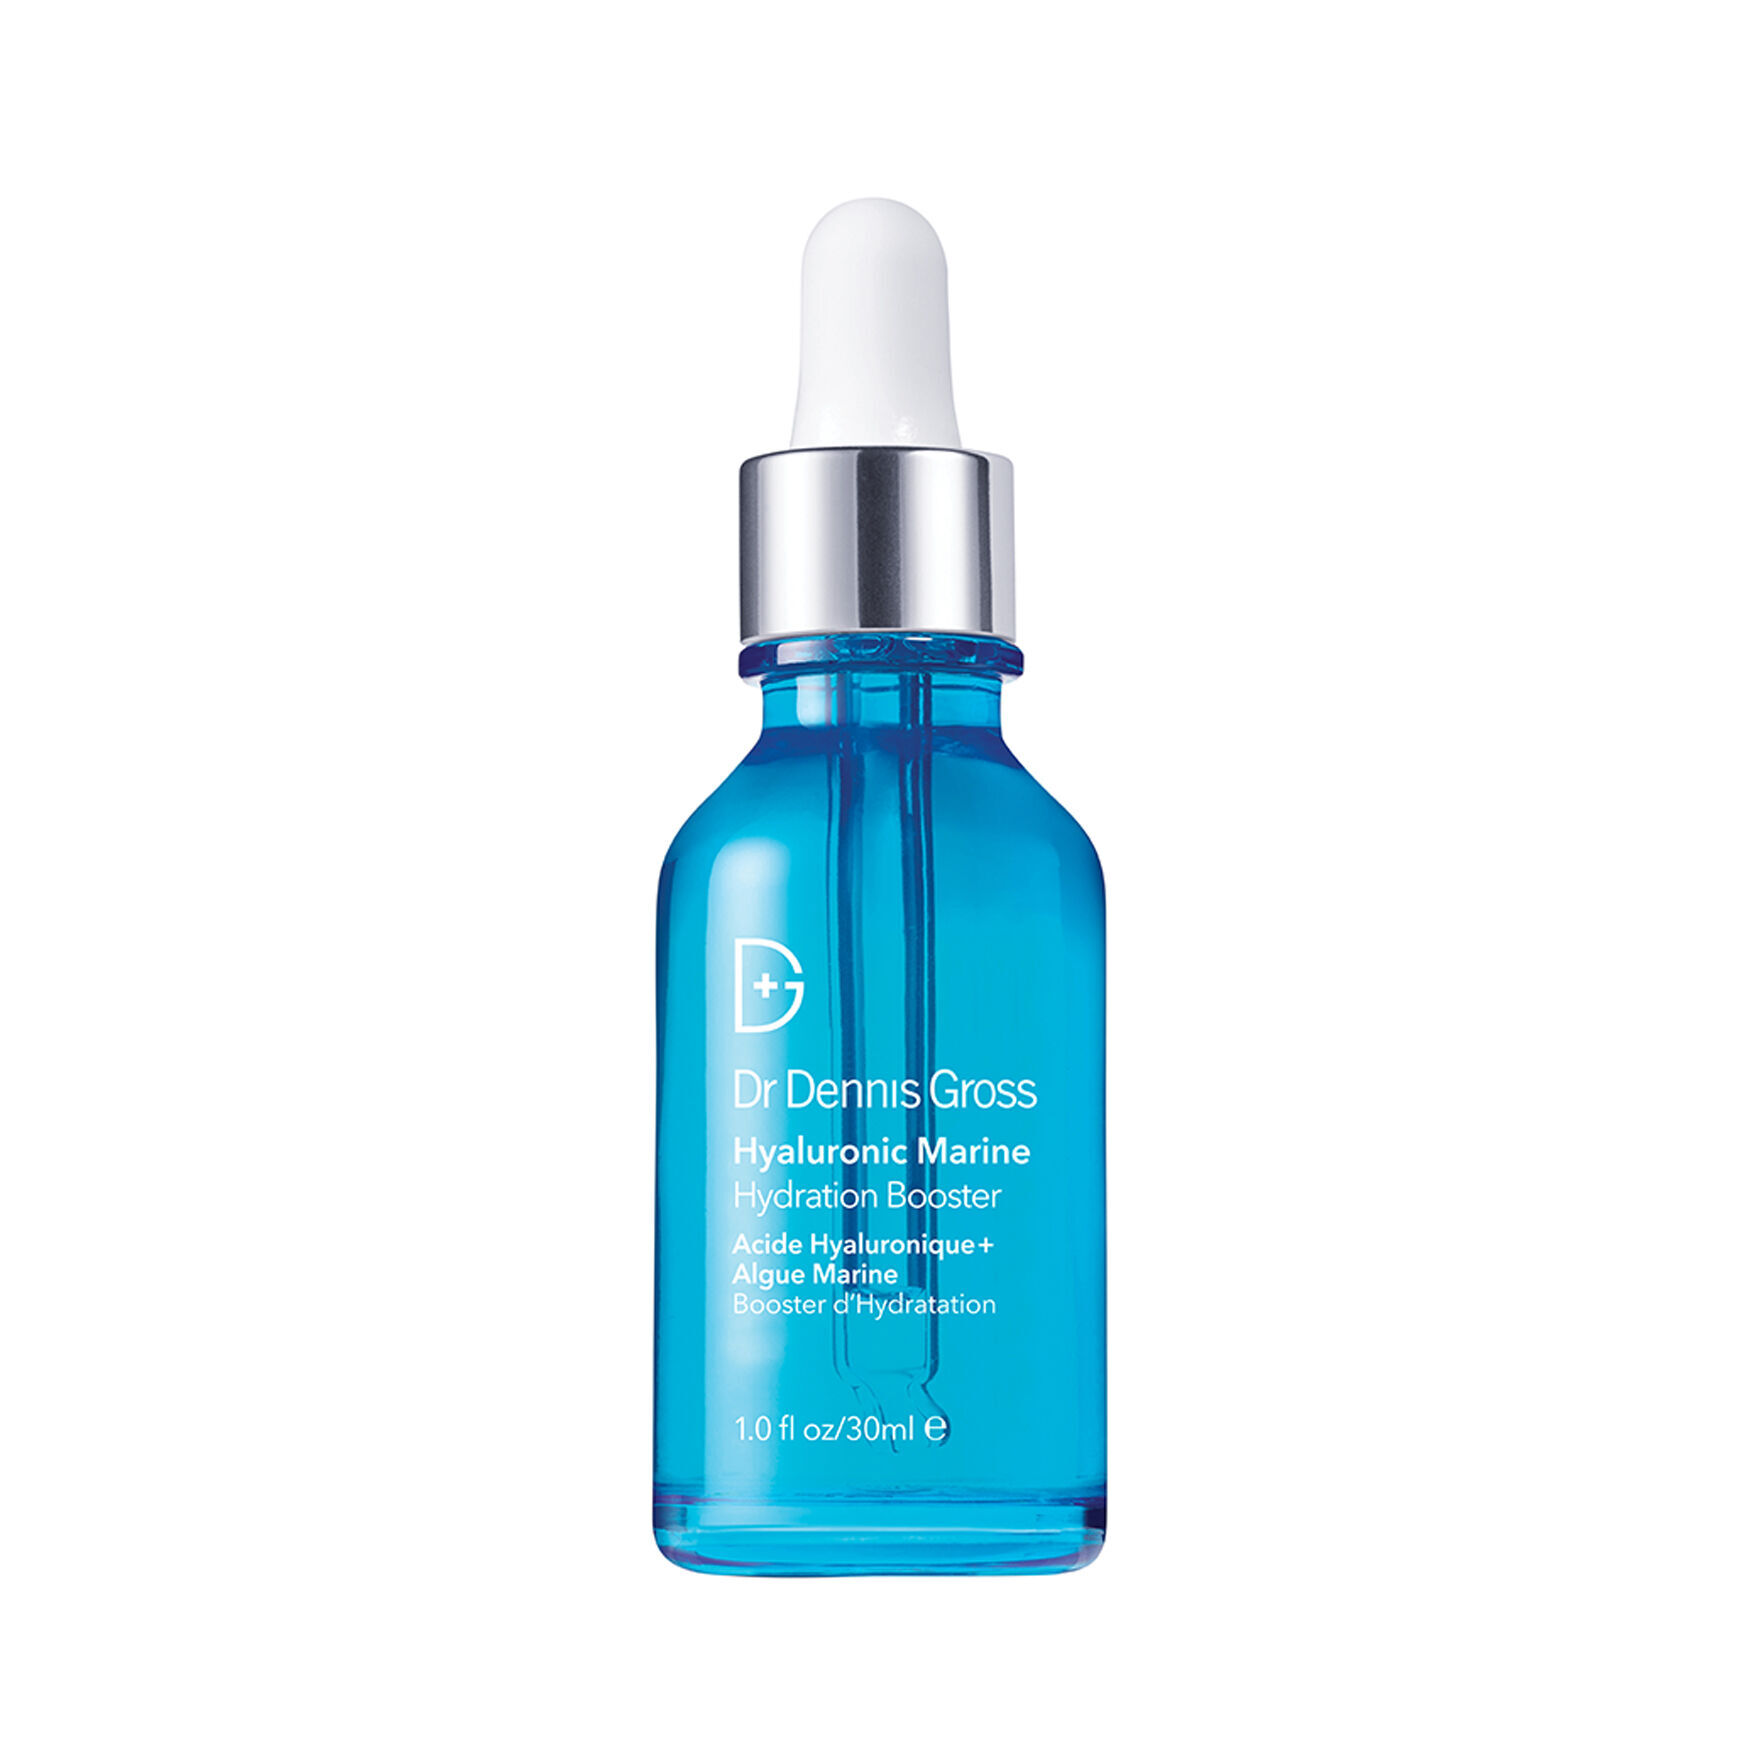 Dr Dennis Gross - Hyaluronic Marine Hydration Booster by Dr Dennis Gross